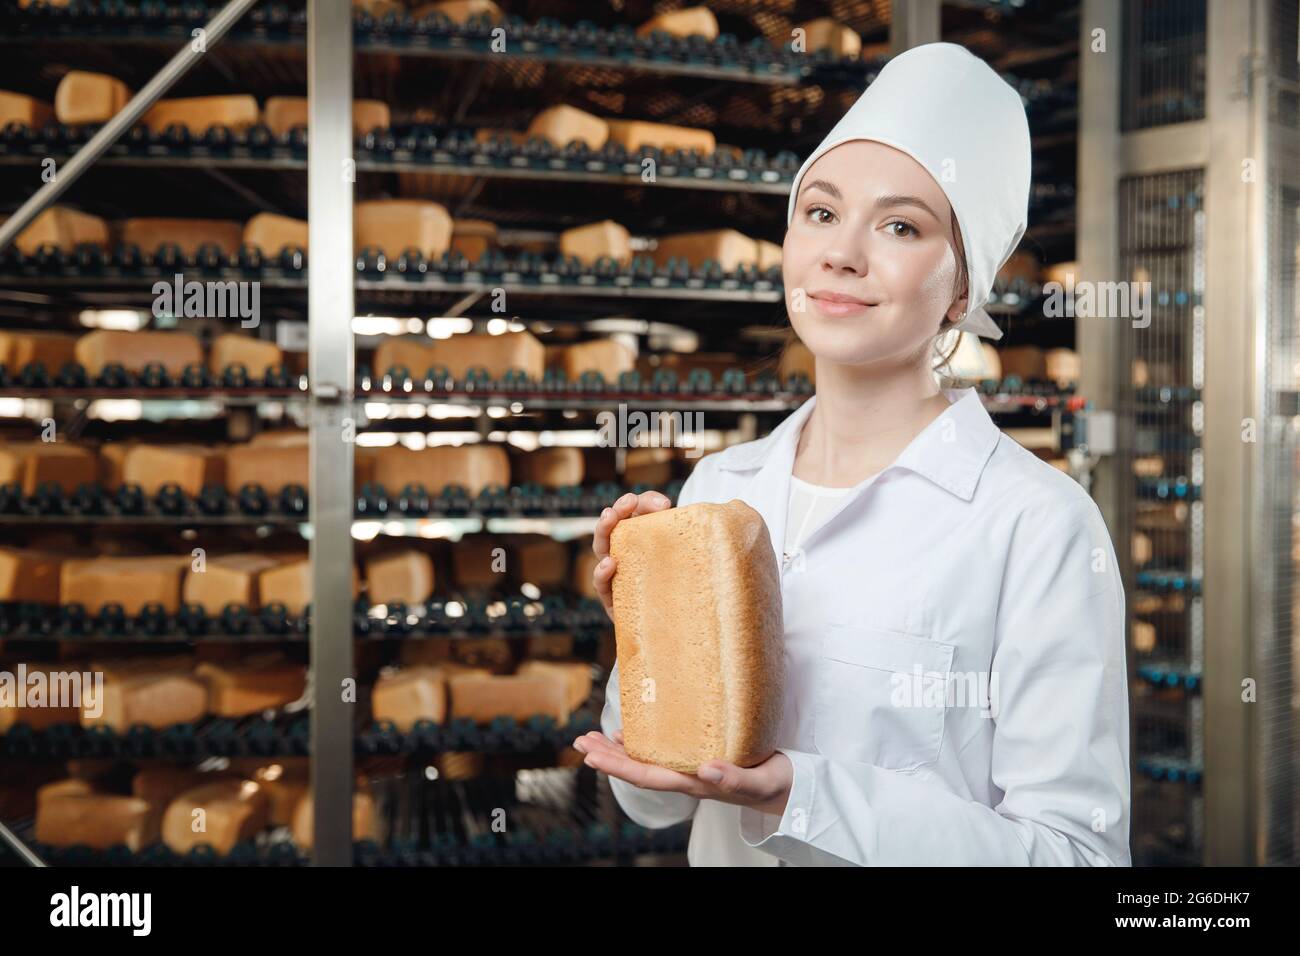 https://c8.alamy.com/comp/2G6DHK7/woman-baker-holding-fresh-bread-in-hands-on-background-automatic-conveyor-of-bakery-food-factory-2G6DHK7.jpg